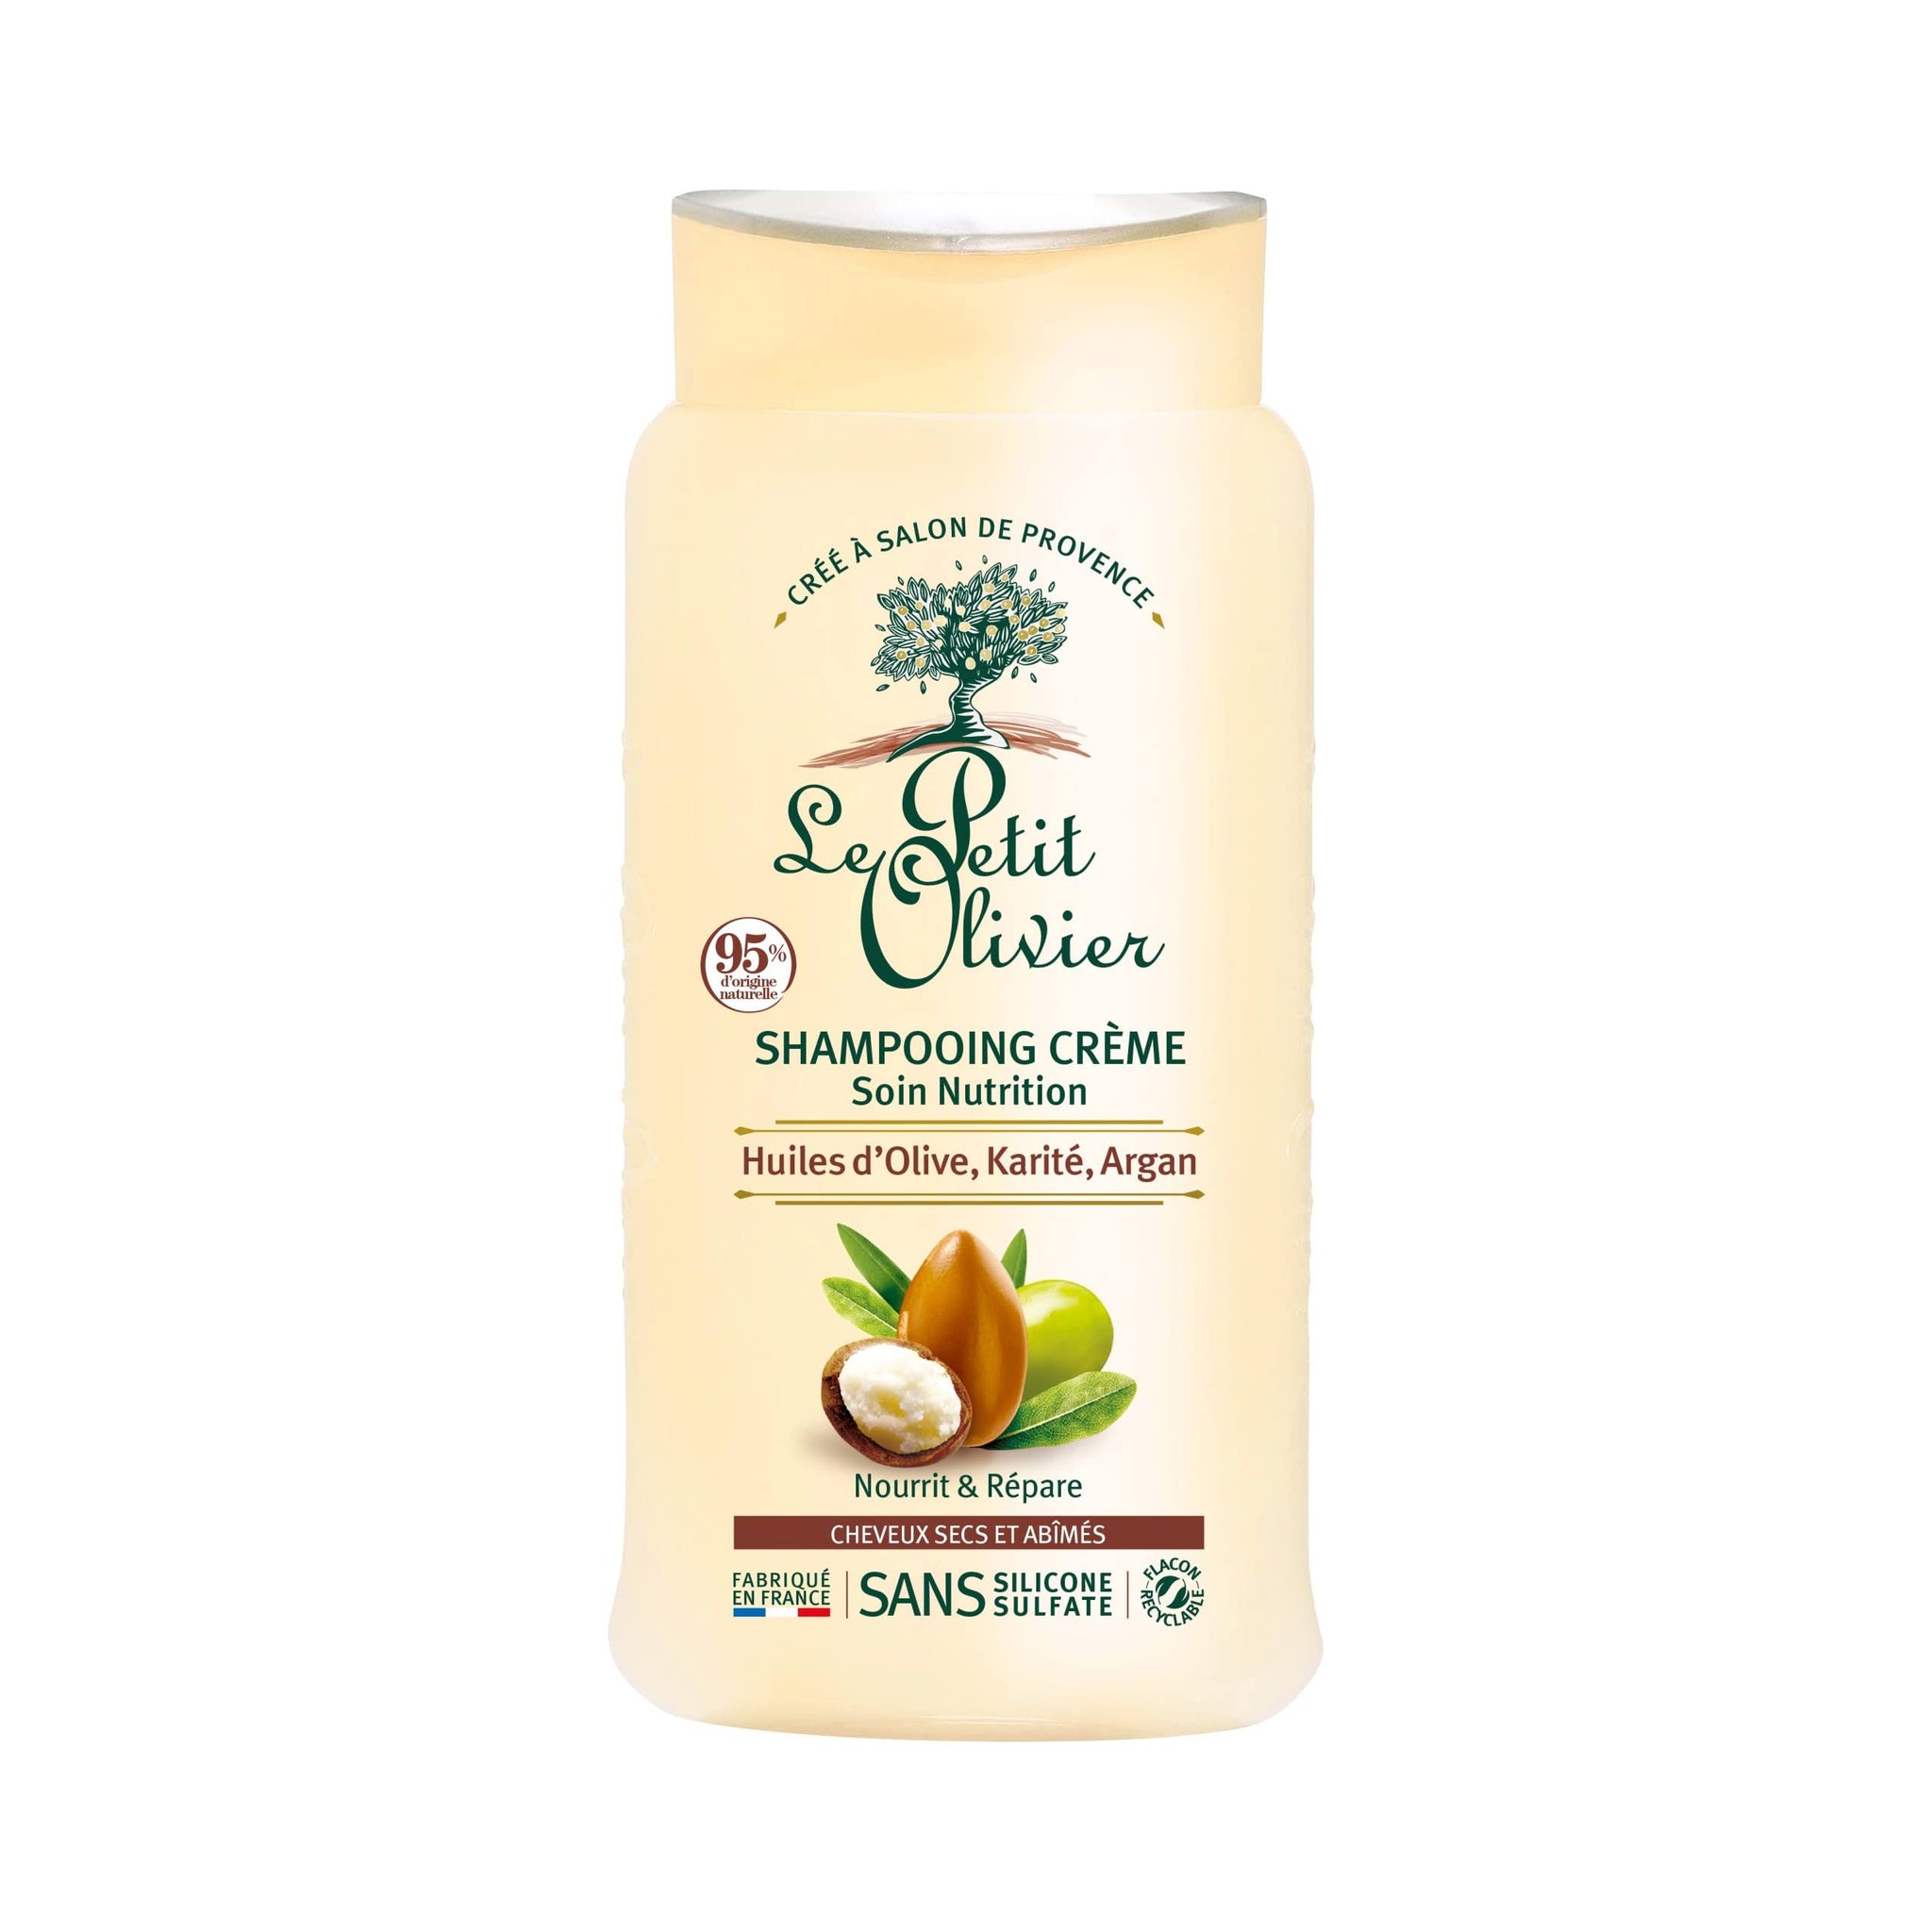 Le Petit Olivier Nutrition Cream Shampoo - Olive, Shea, Argan Oils - Repairs Dry, Damaged Hair - Enriched With Natural Origin Ingredients - Free Of Silicone - 8.45 oz